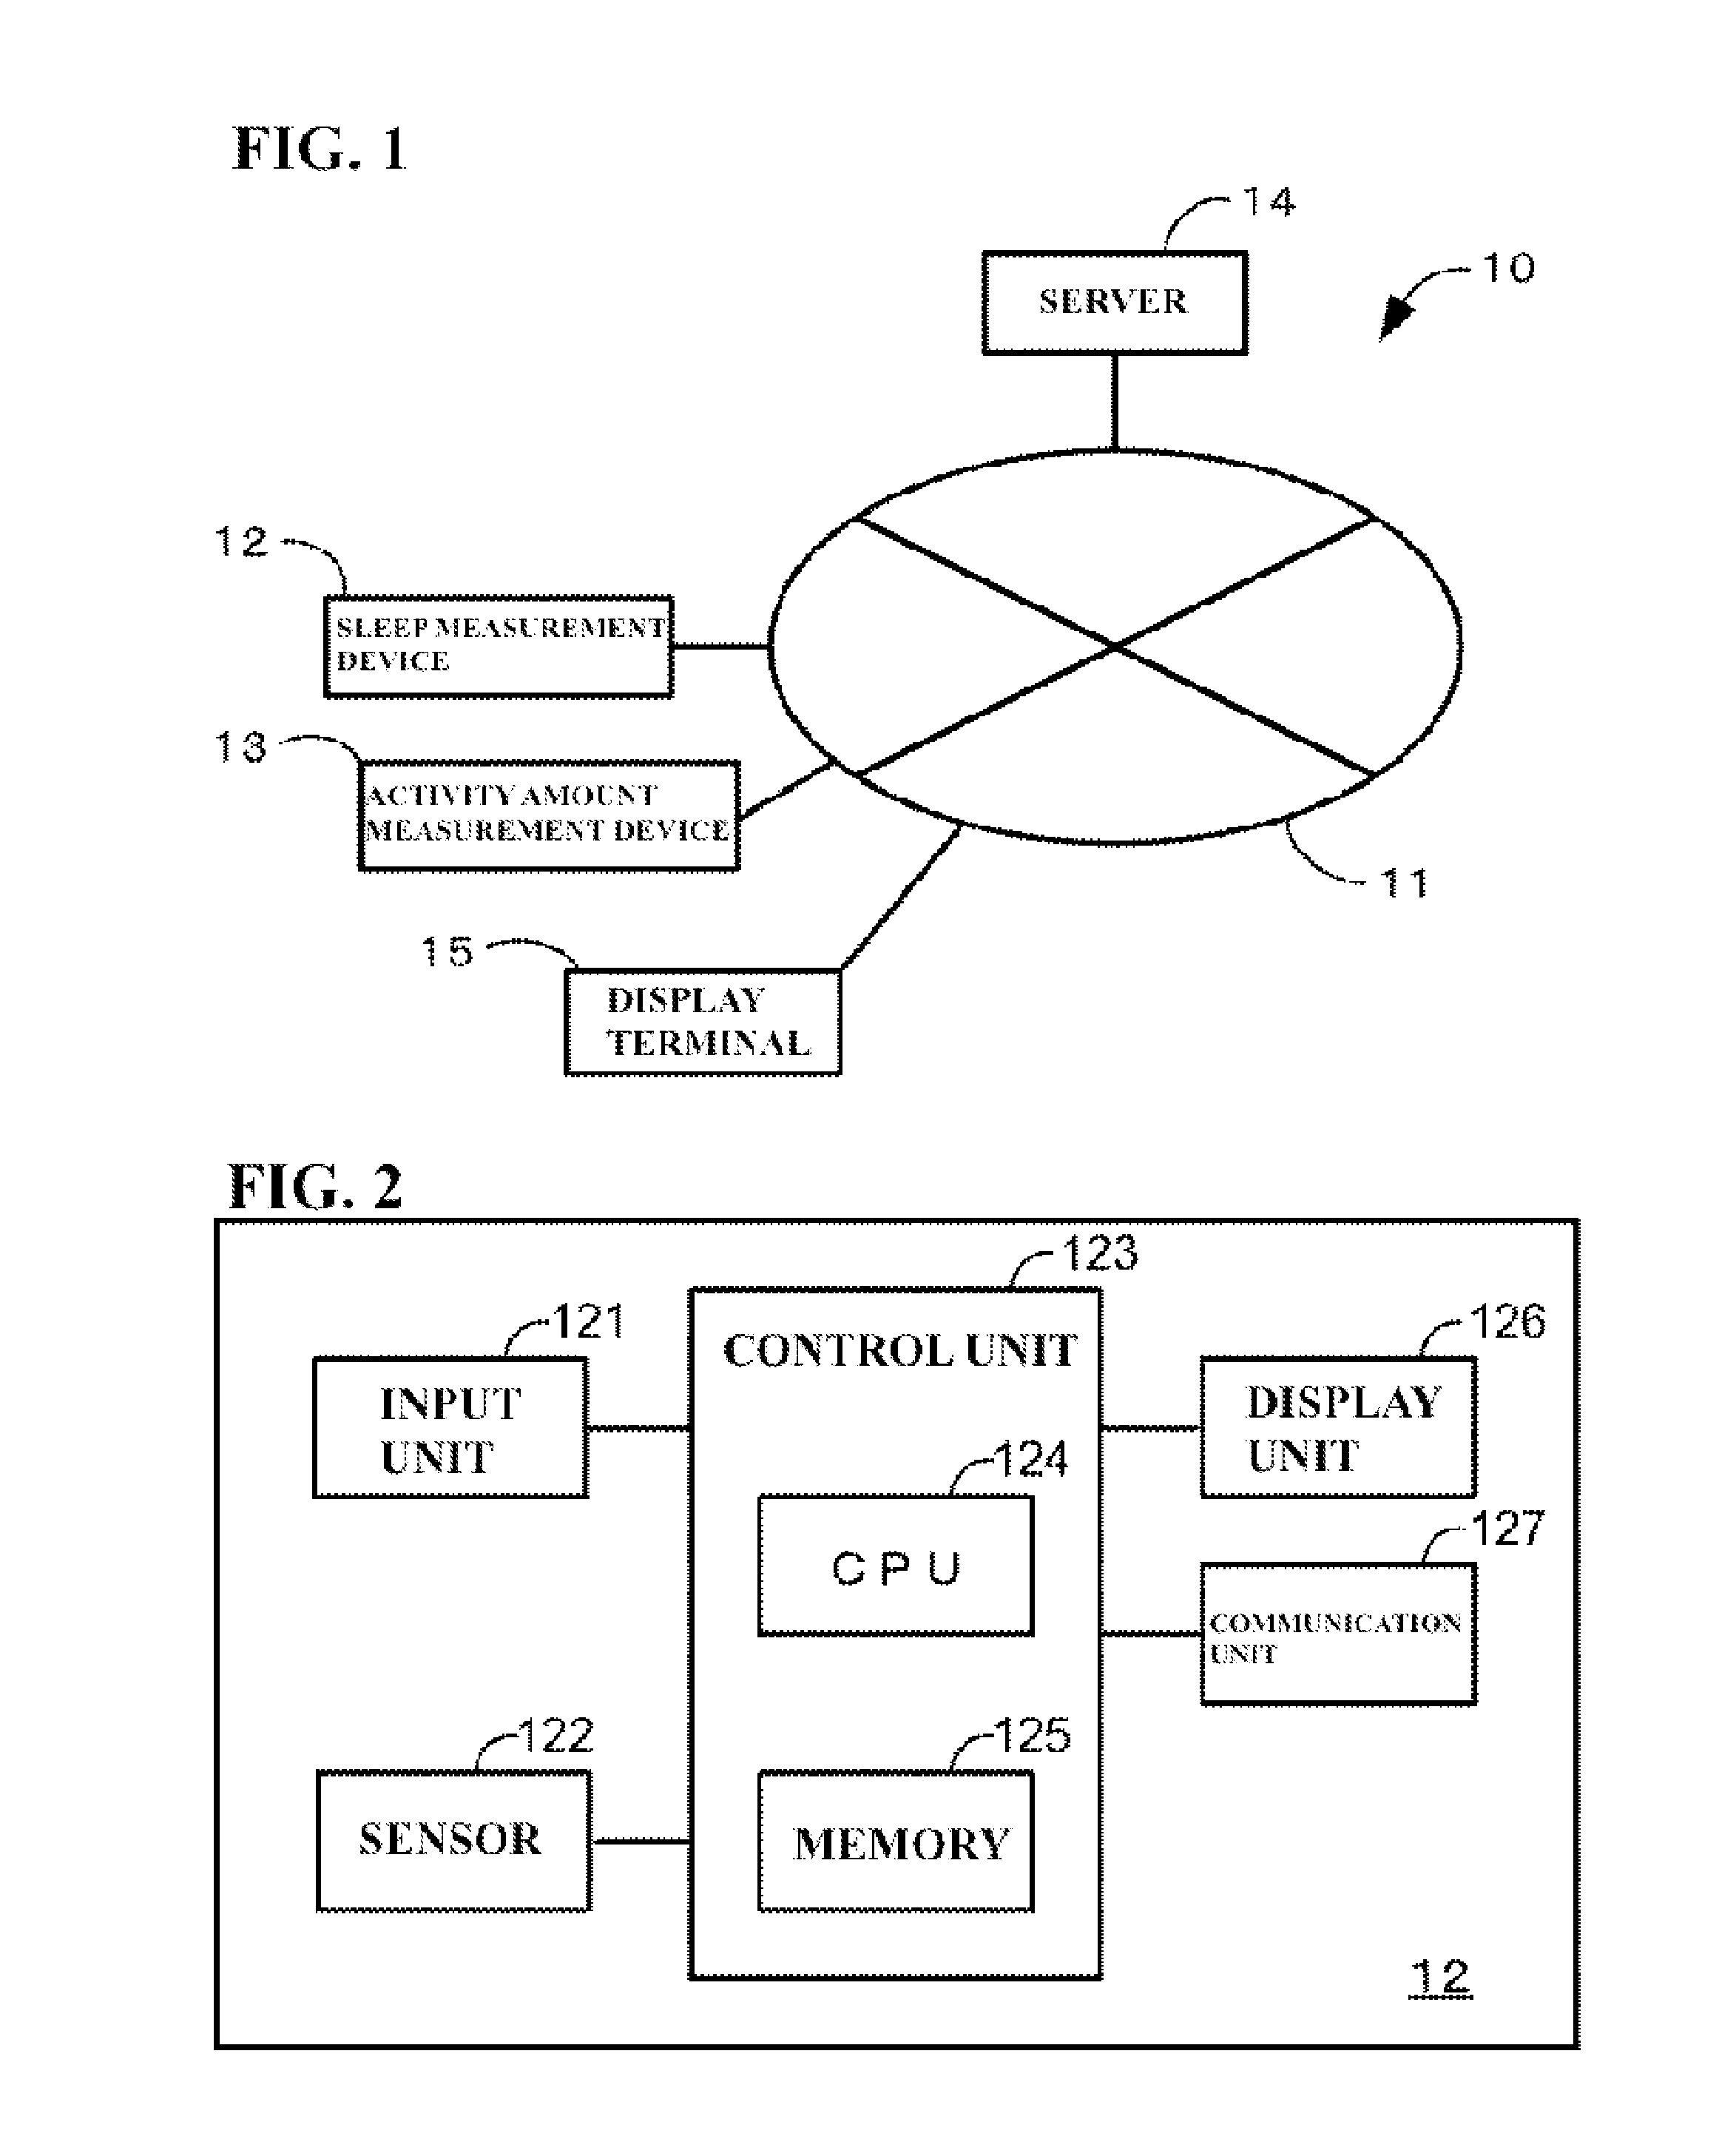 Sleep and activity amount display program, device, system, and method